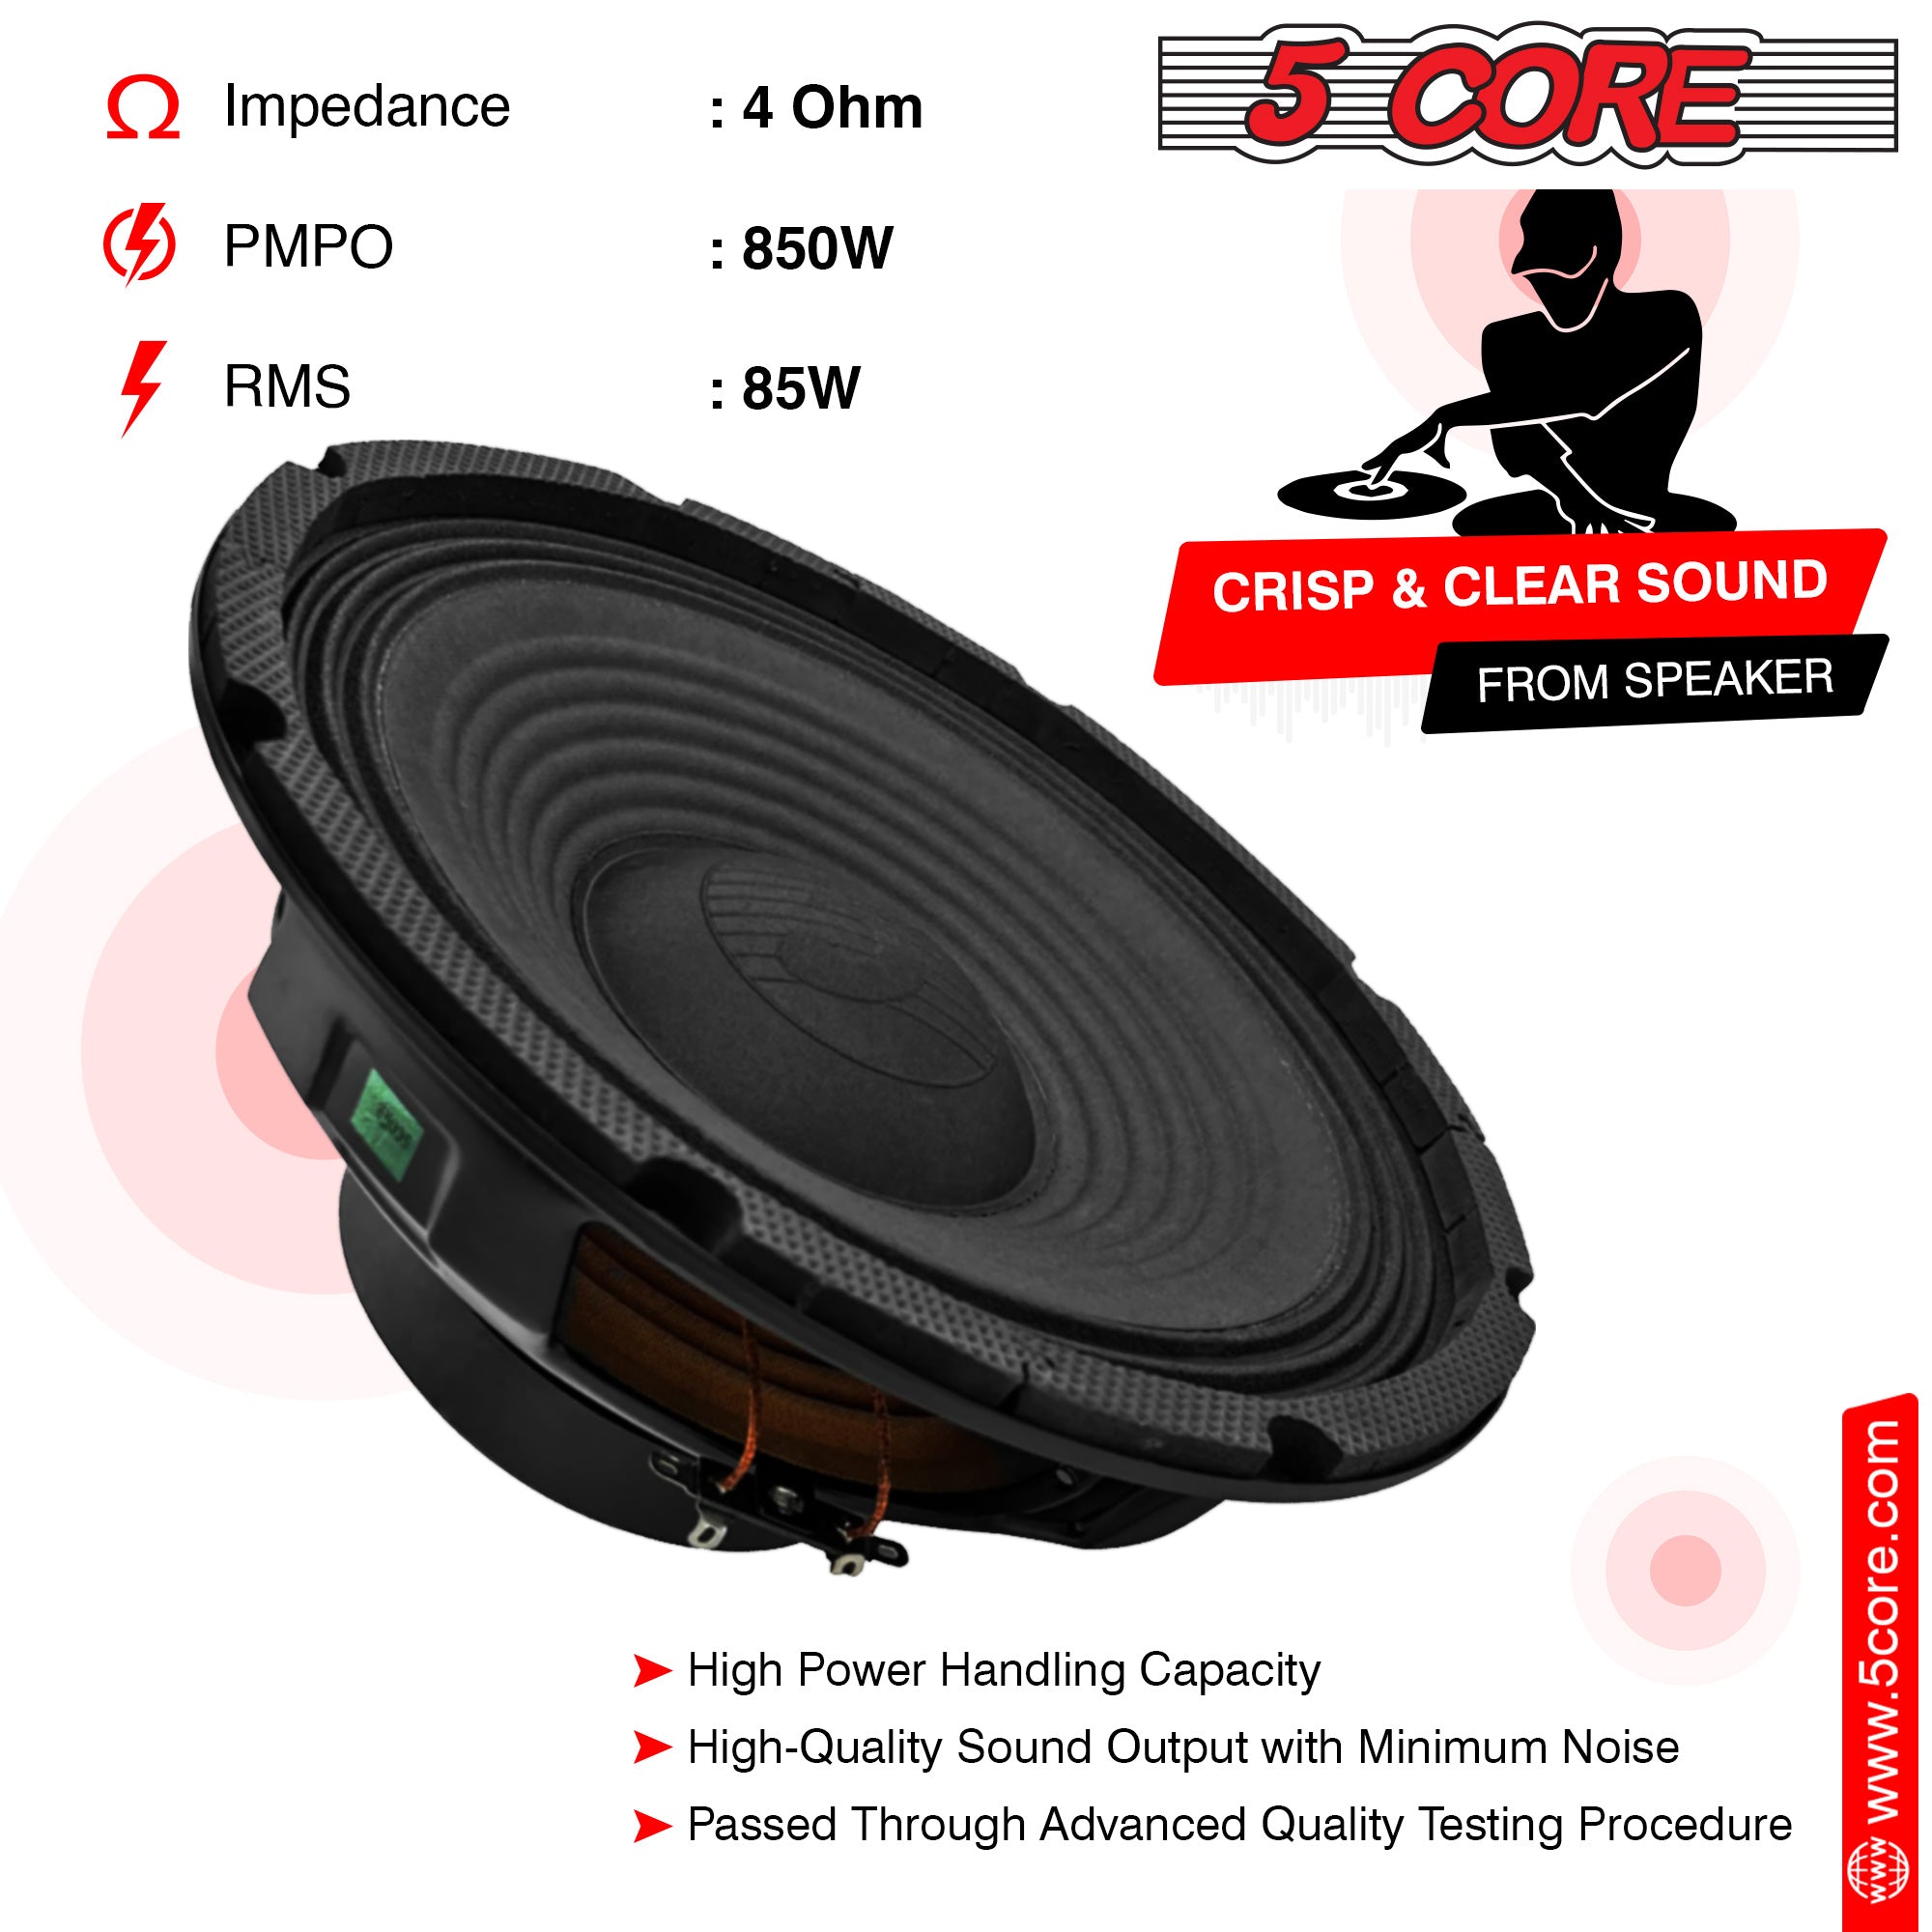 5 Core 10 Inch Subwoofer 1 Piece 85 Watt RMS Power Car Audio Speaker 4 OHM Raw Replacement Sub Woofer System Powerful Bass Surround Sound Stereo Subwoofers w Premium Magnet 1 Inch Voice Coil - FR-10-120 WP